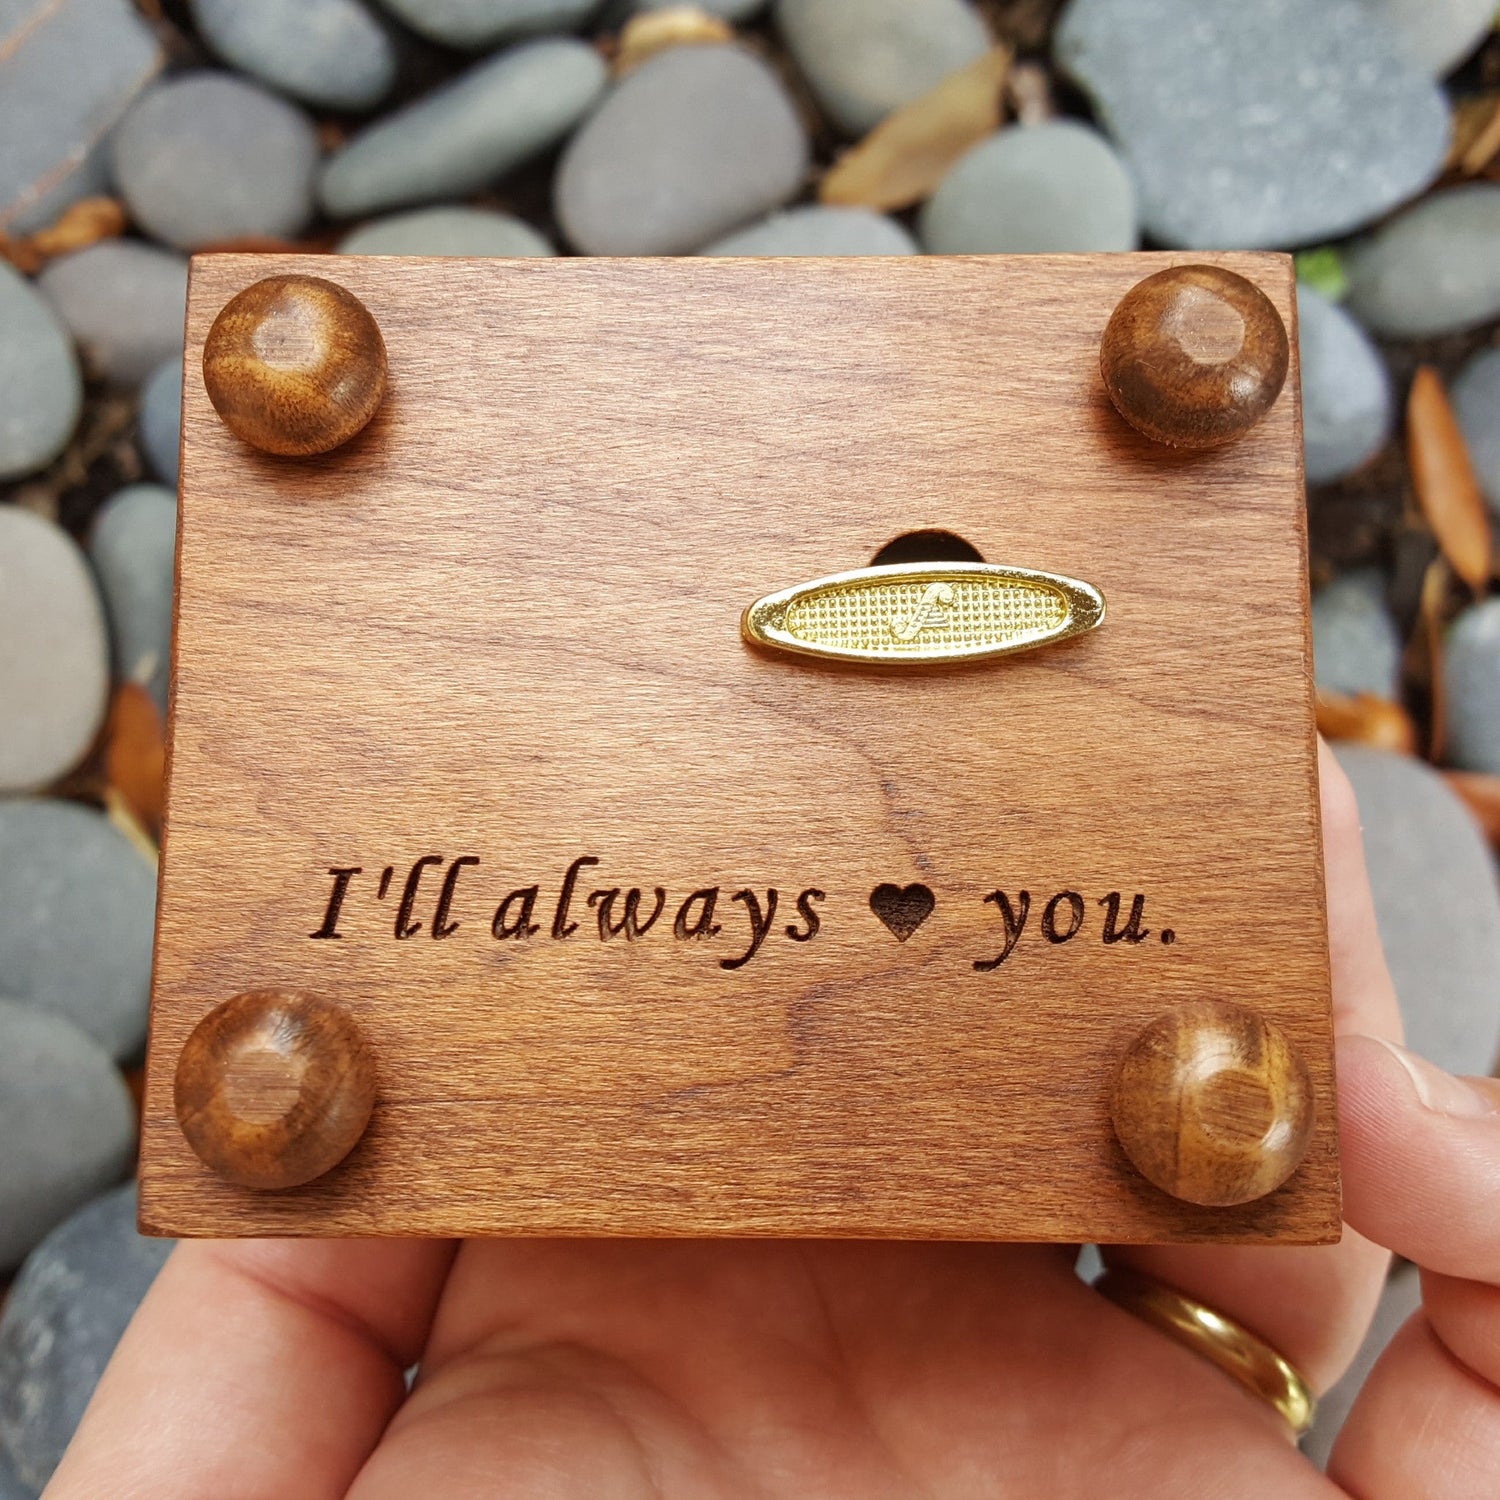 I'll always love you, engraved message on the music box under side